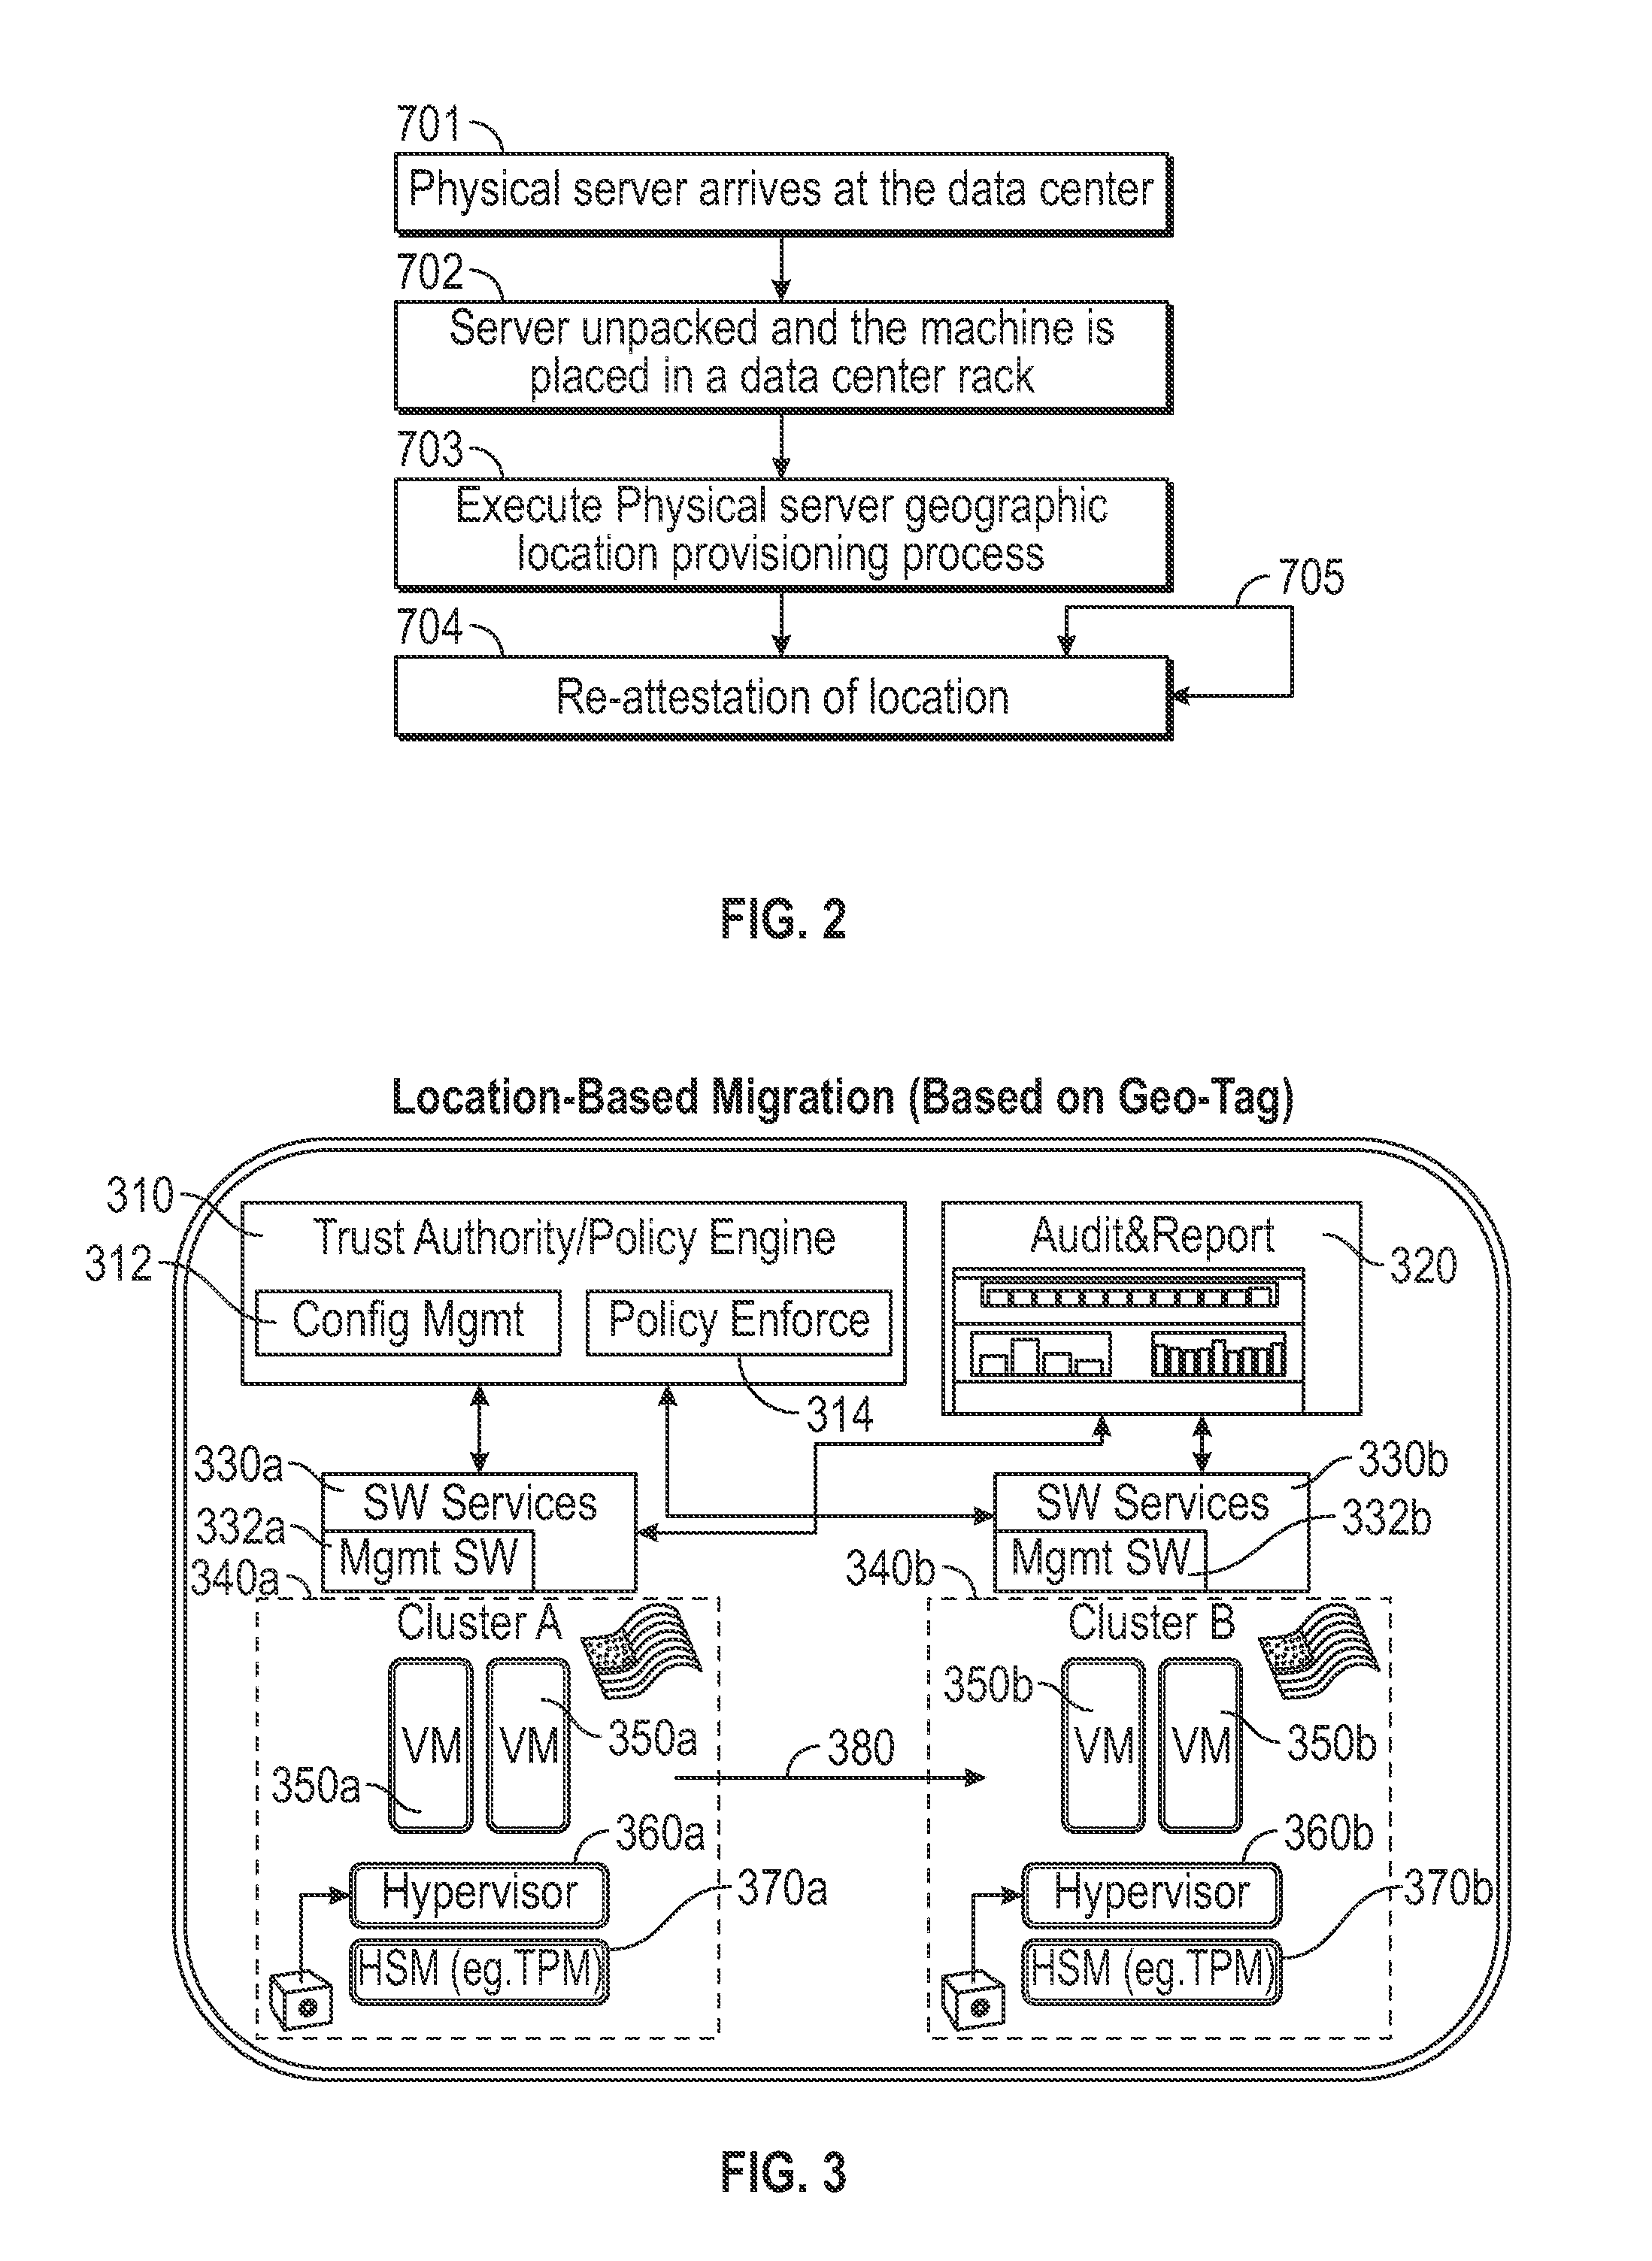 Systems and methods for securely provisioning the geographic location of physical infrastructure elements in cloud computing environments